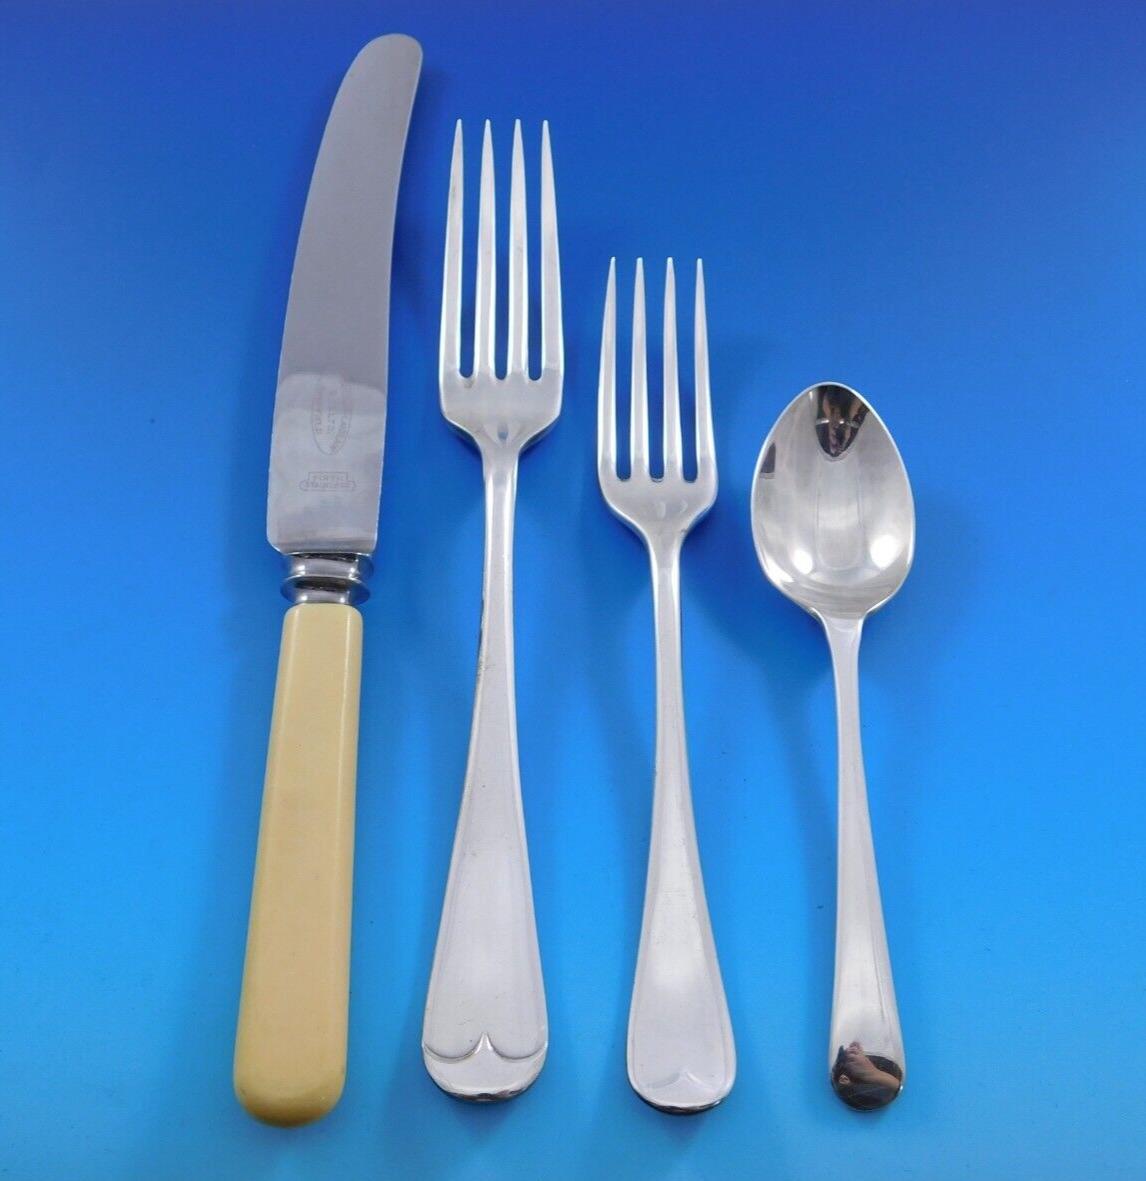 Arthur Price is the UK's most desired cutlery brand with a reputation for unparalleled quality, craftsmanship and design since 1902.

Rattail by Arthur Price Silverplated Flatware, 14 pieces total including (4) celluloid handle knives. This set